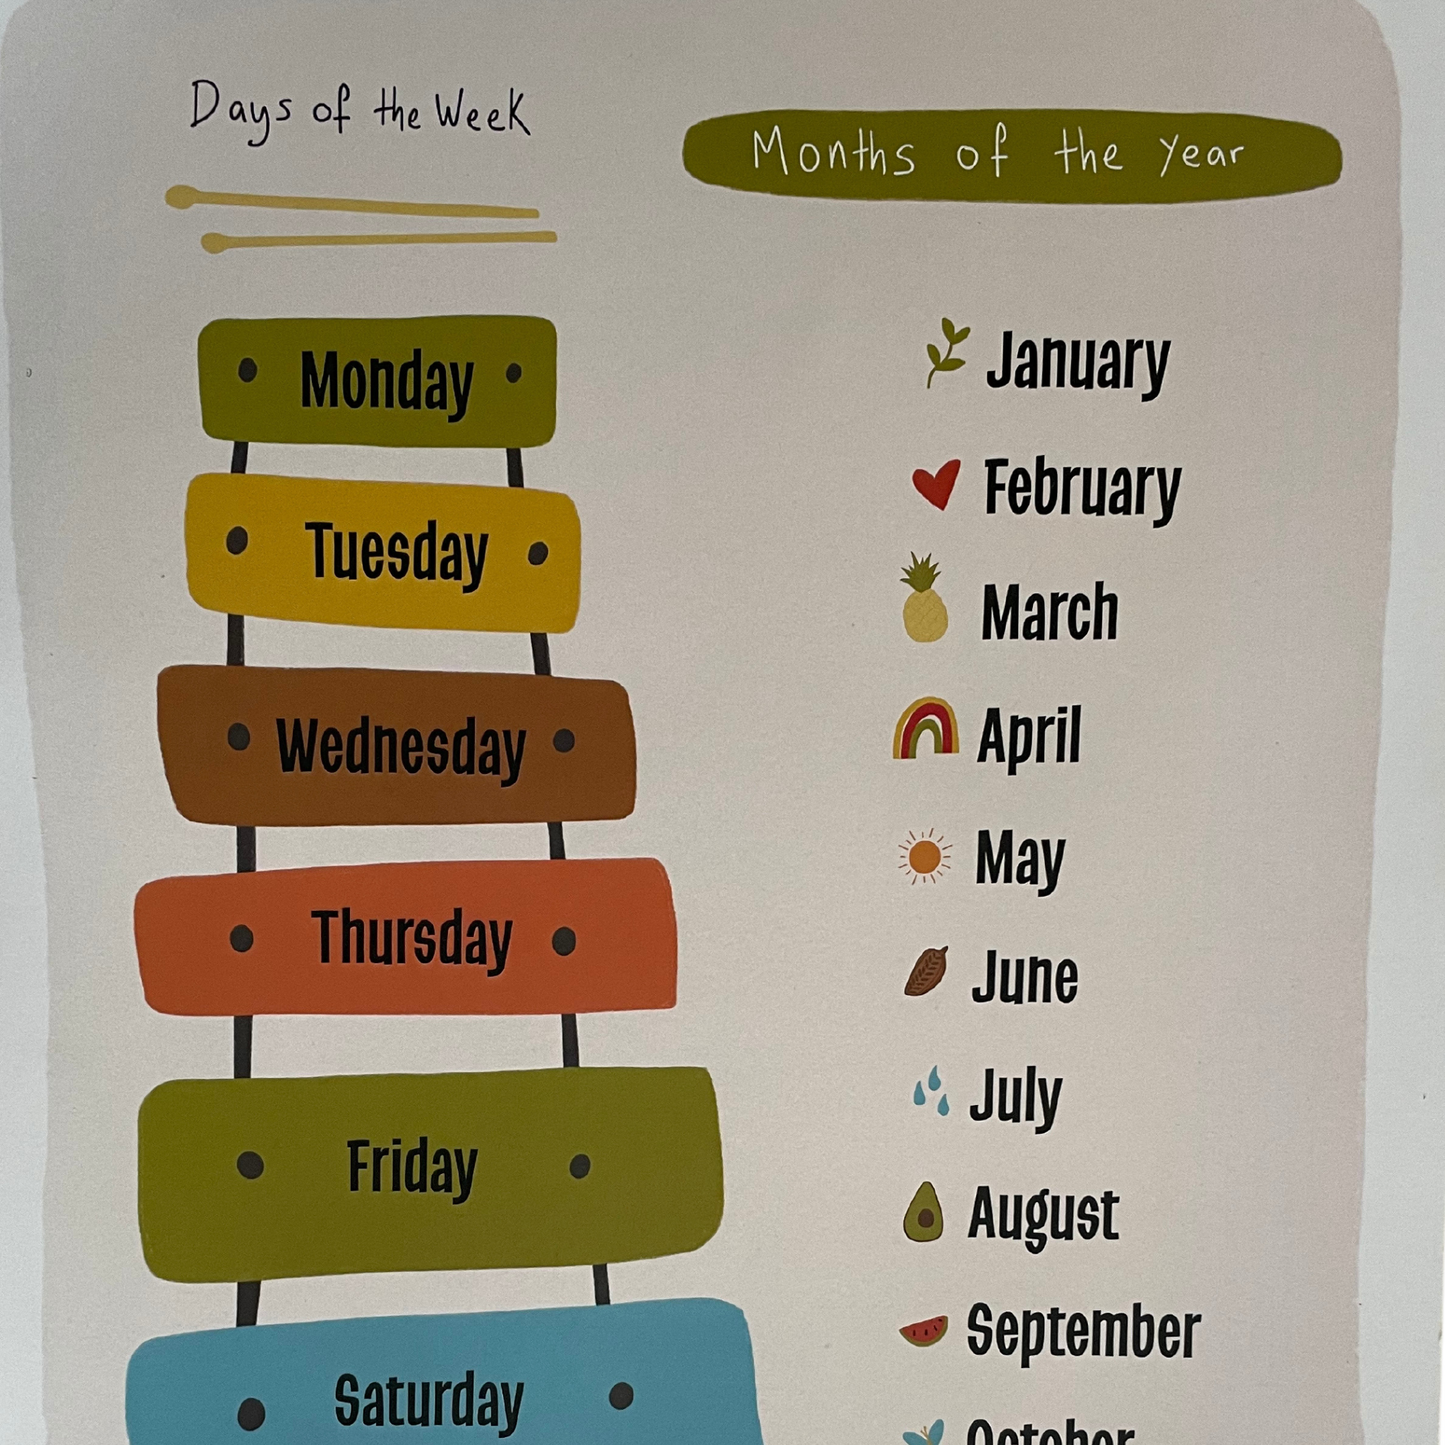 Days of the week and months of the year poster